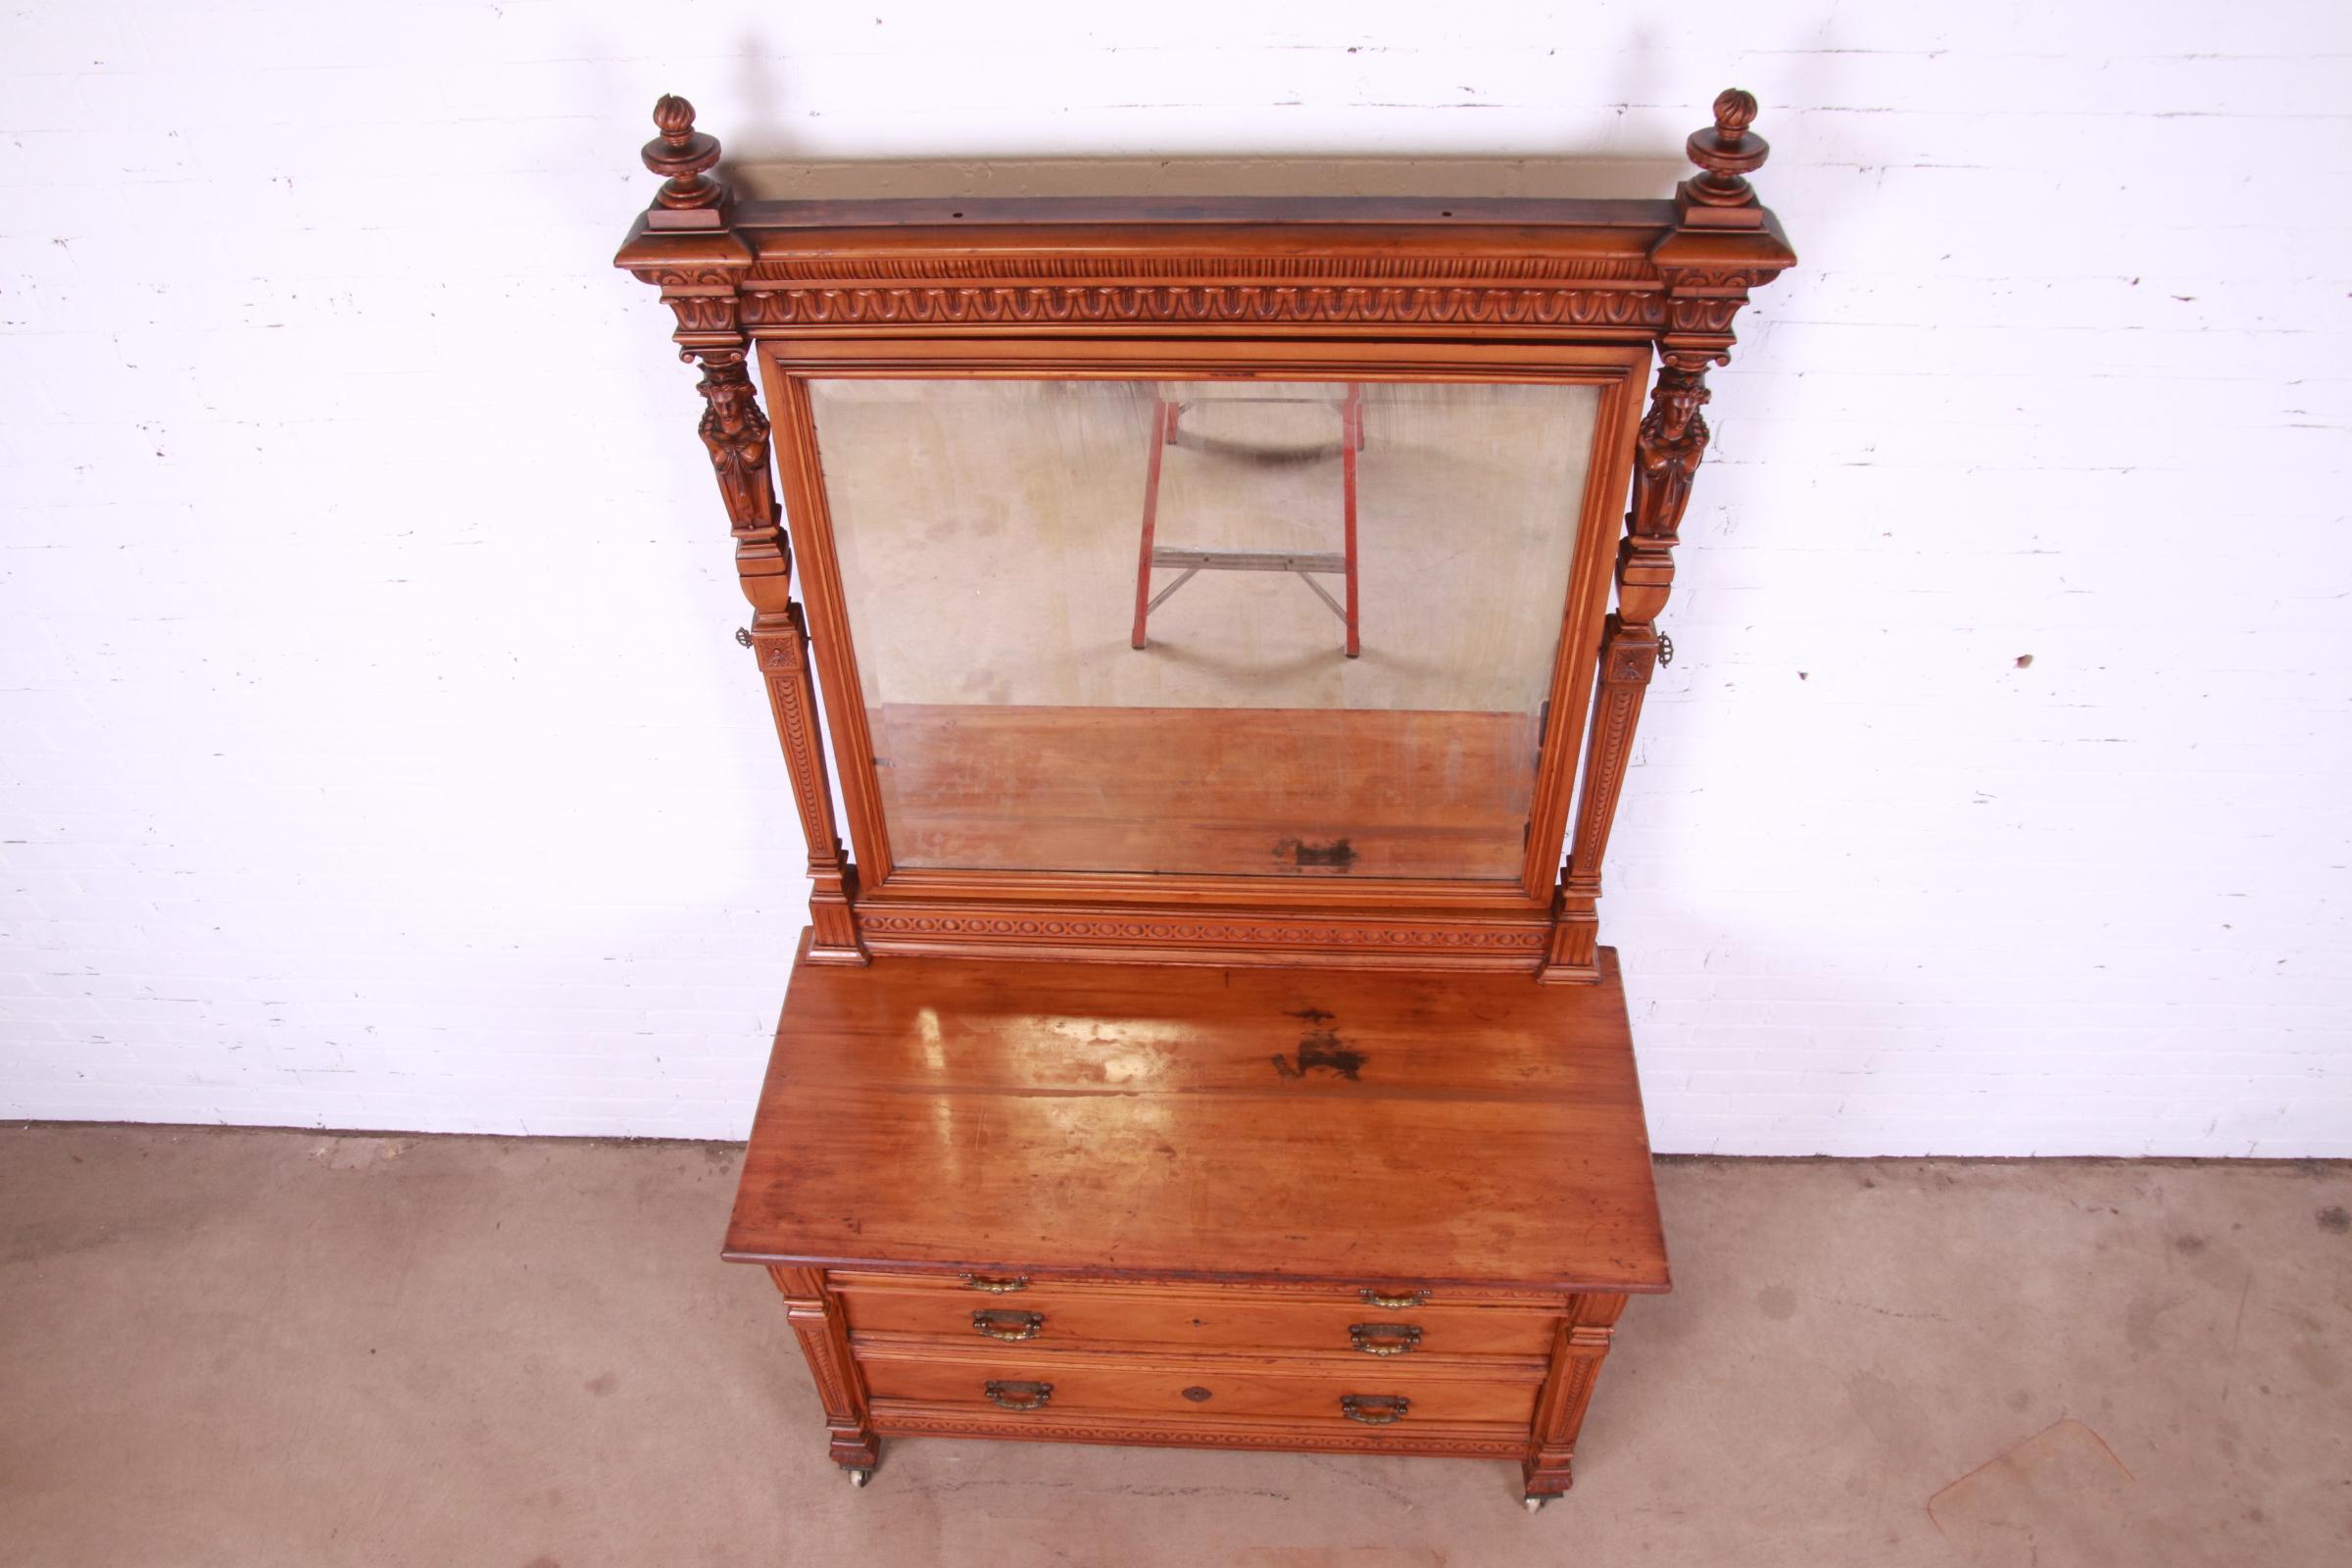 Antique Victorian Ornate Carved Walnut Dresser with Mirror Attributed to Horner For Sale 5